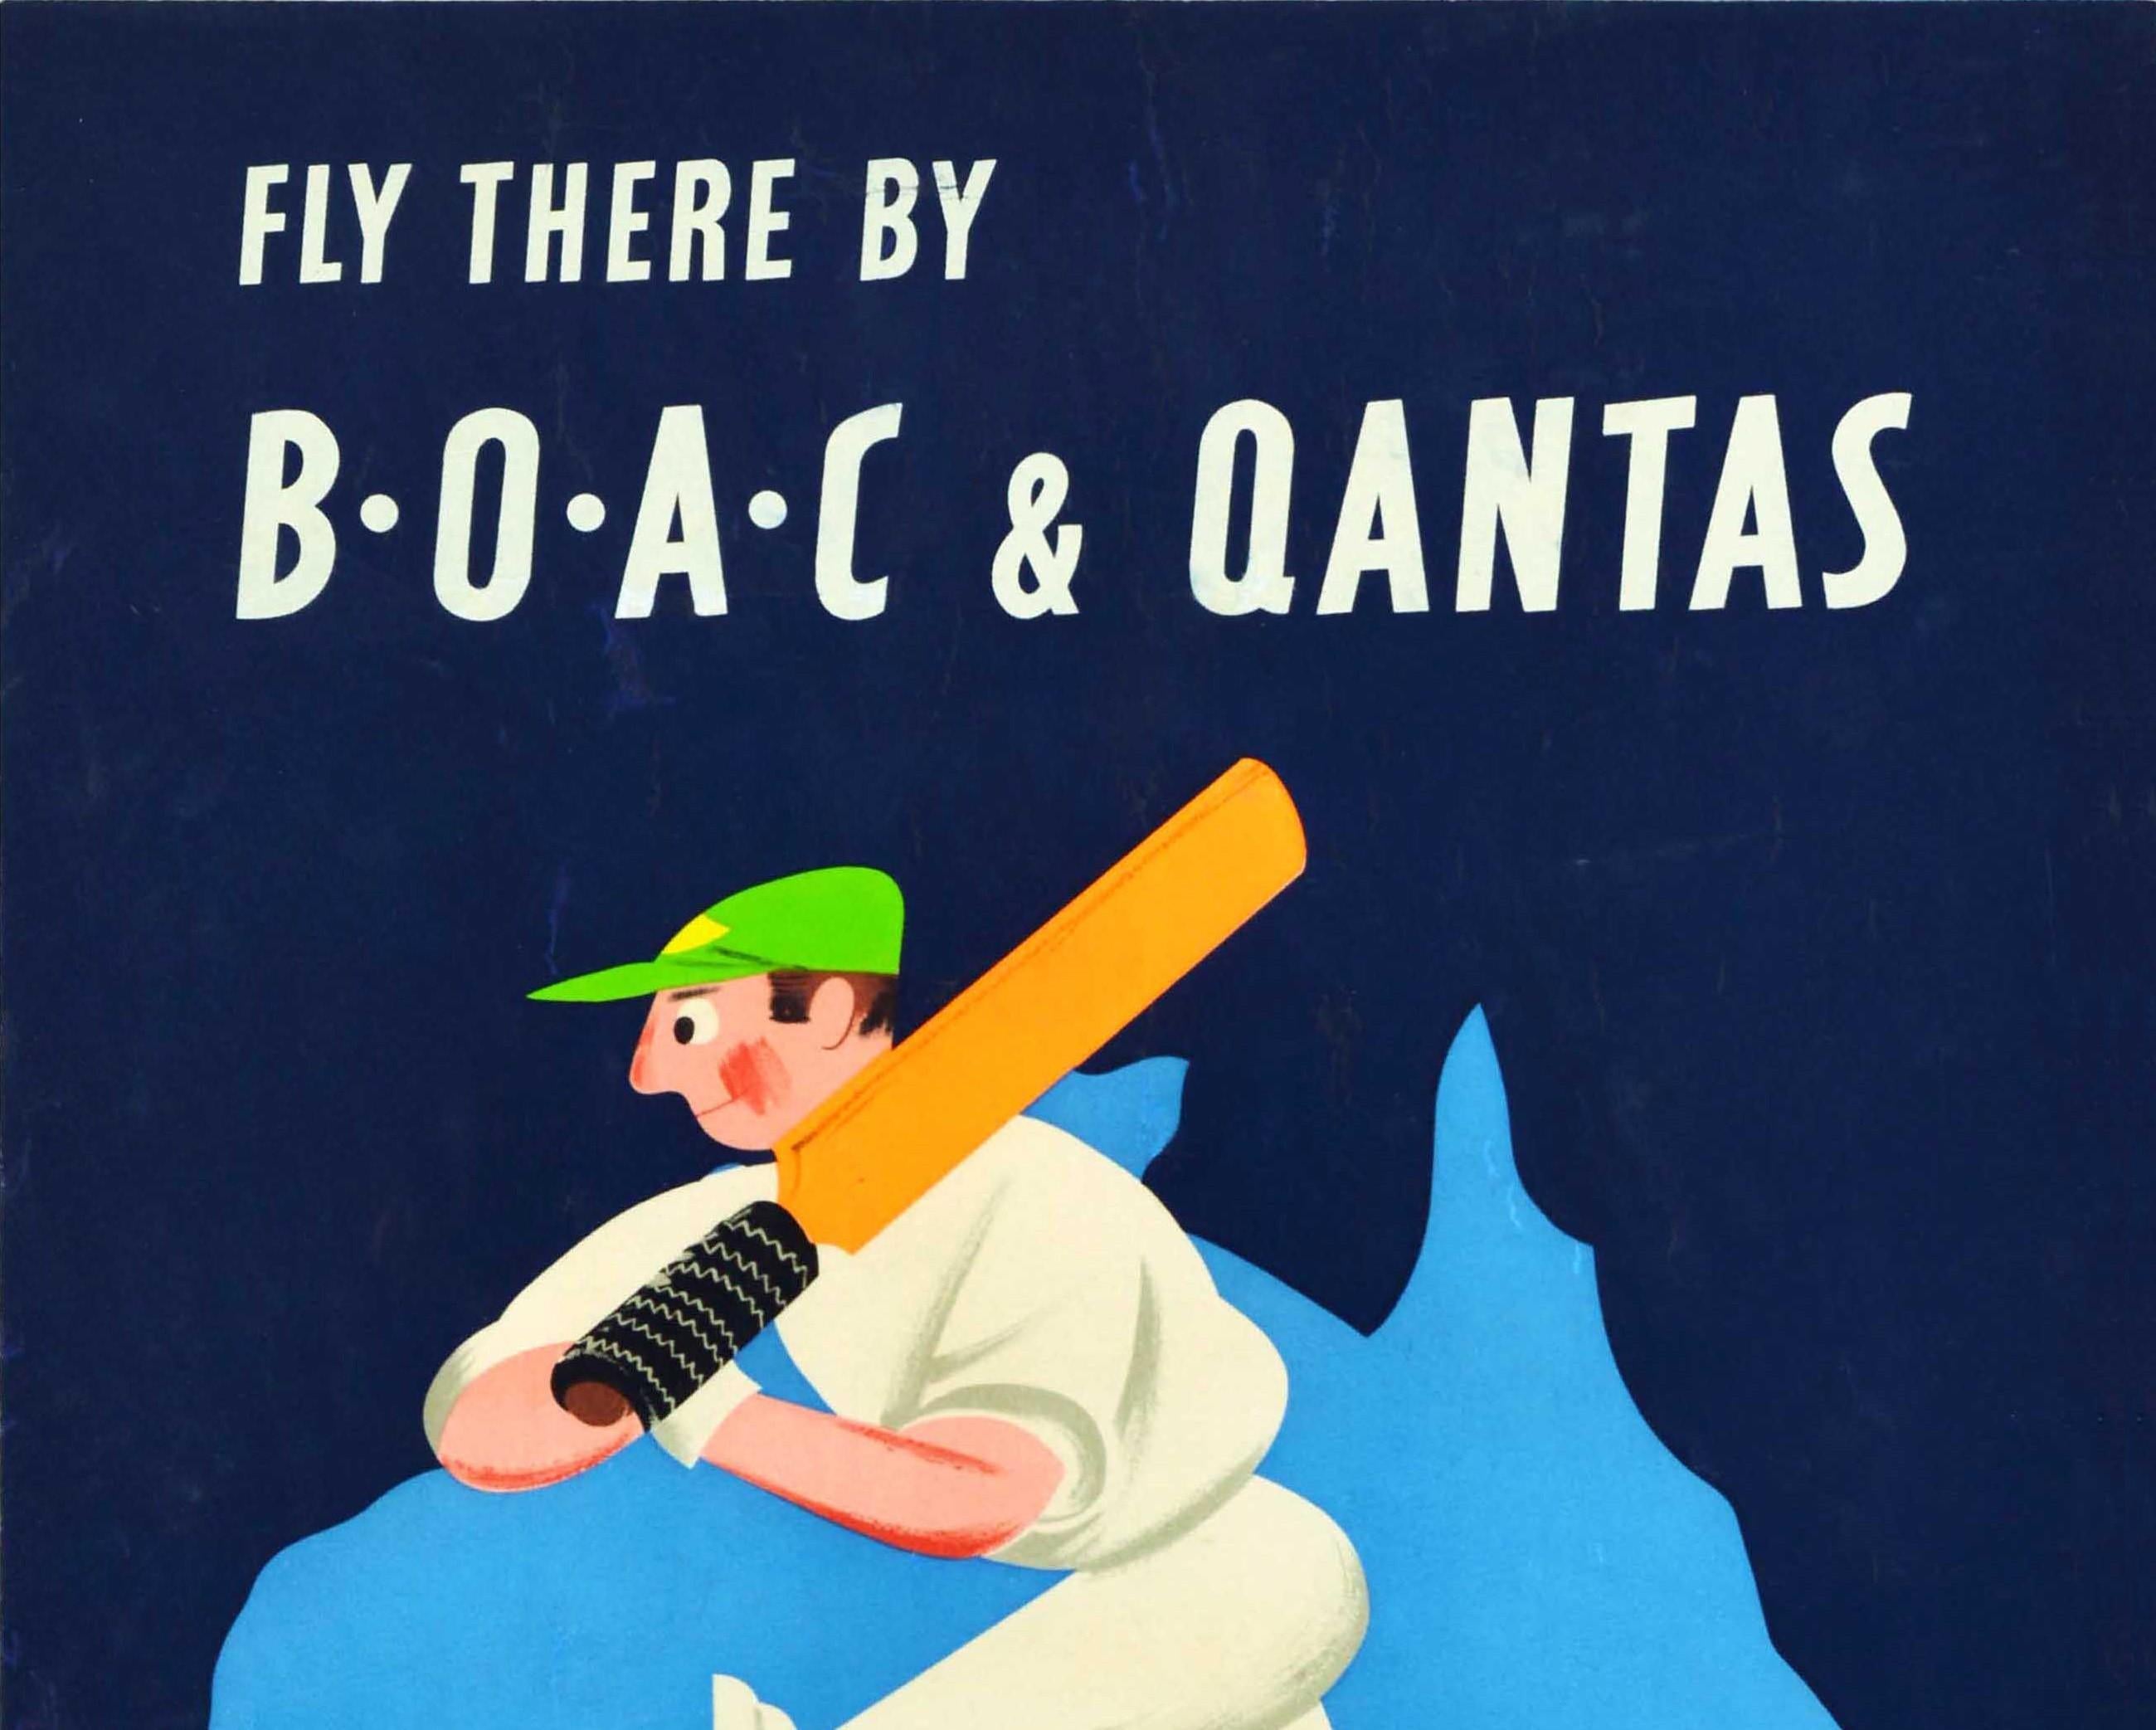 Original vintage travel poster - Fly there by BOAC & Qantas British Overseas Airways Corporation in Association with Qantas Empire Airways Limited South African Airways Tasman Empire Airways Limited - featuring a colourful sport design depicting a